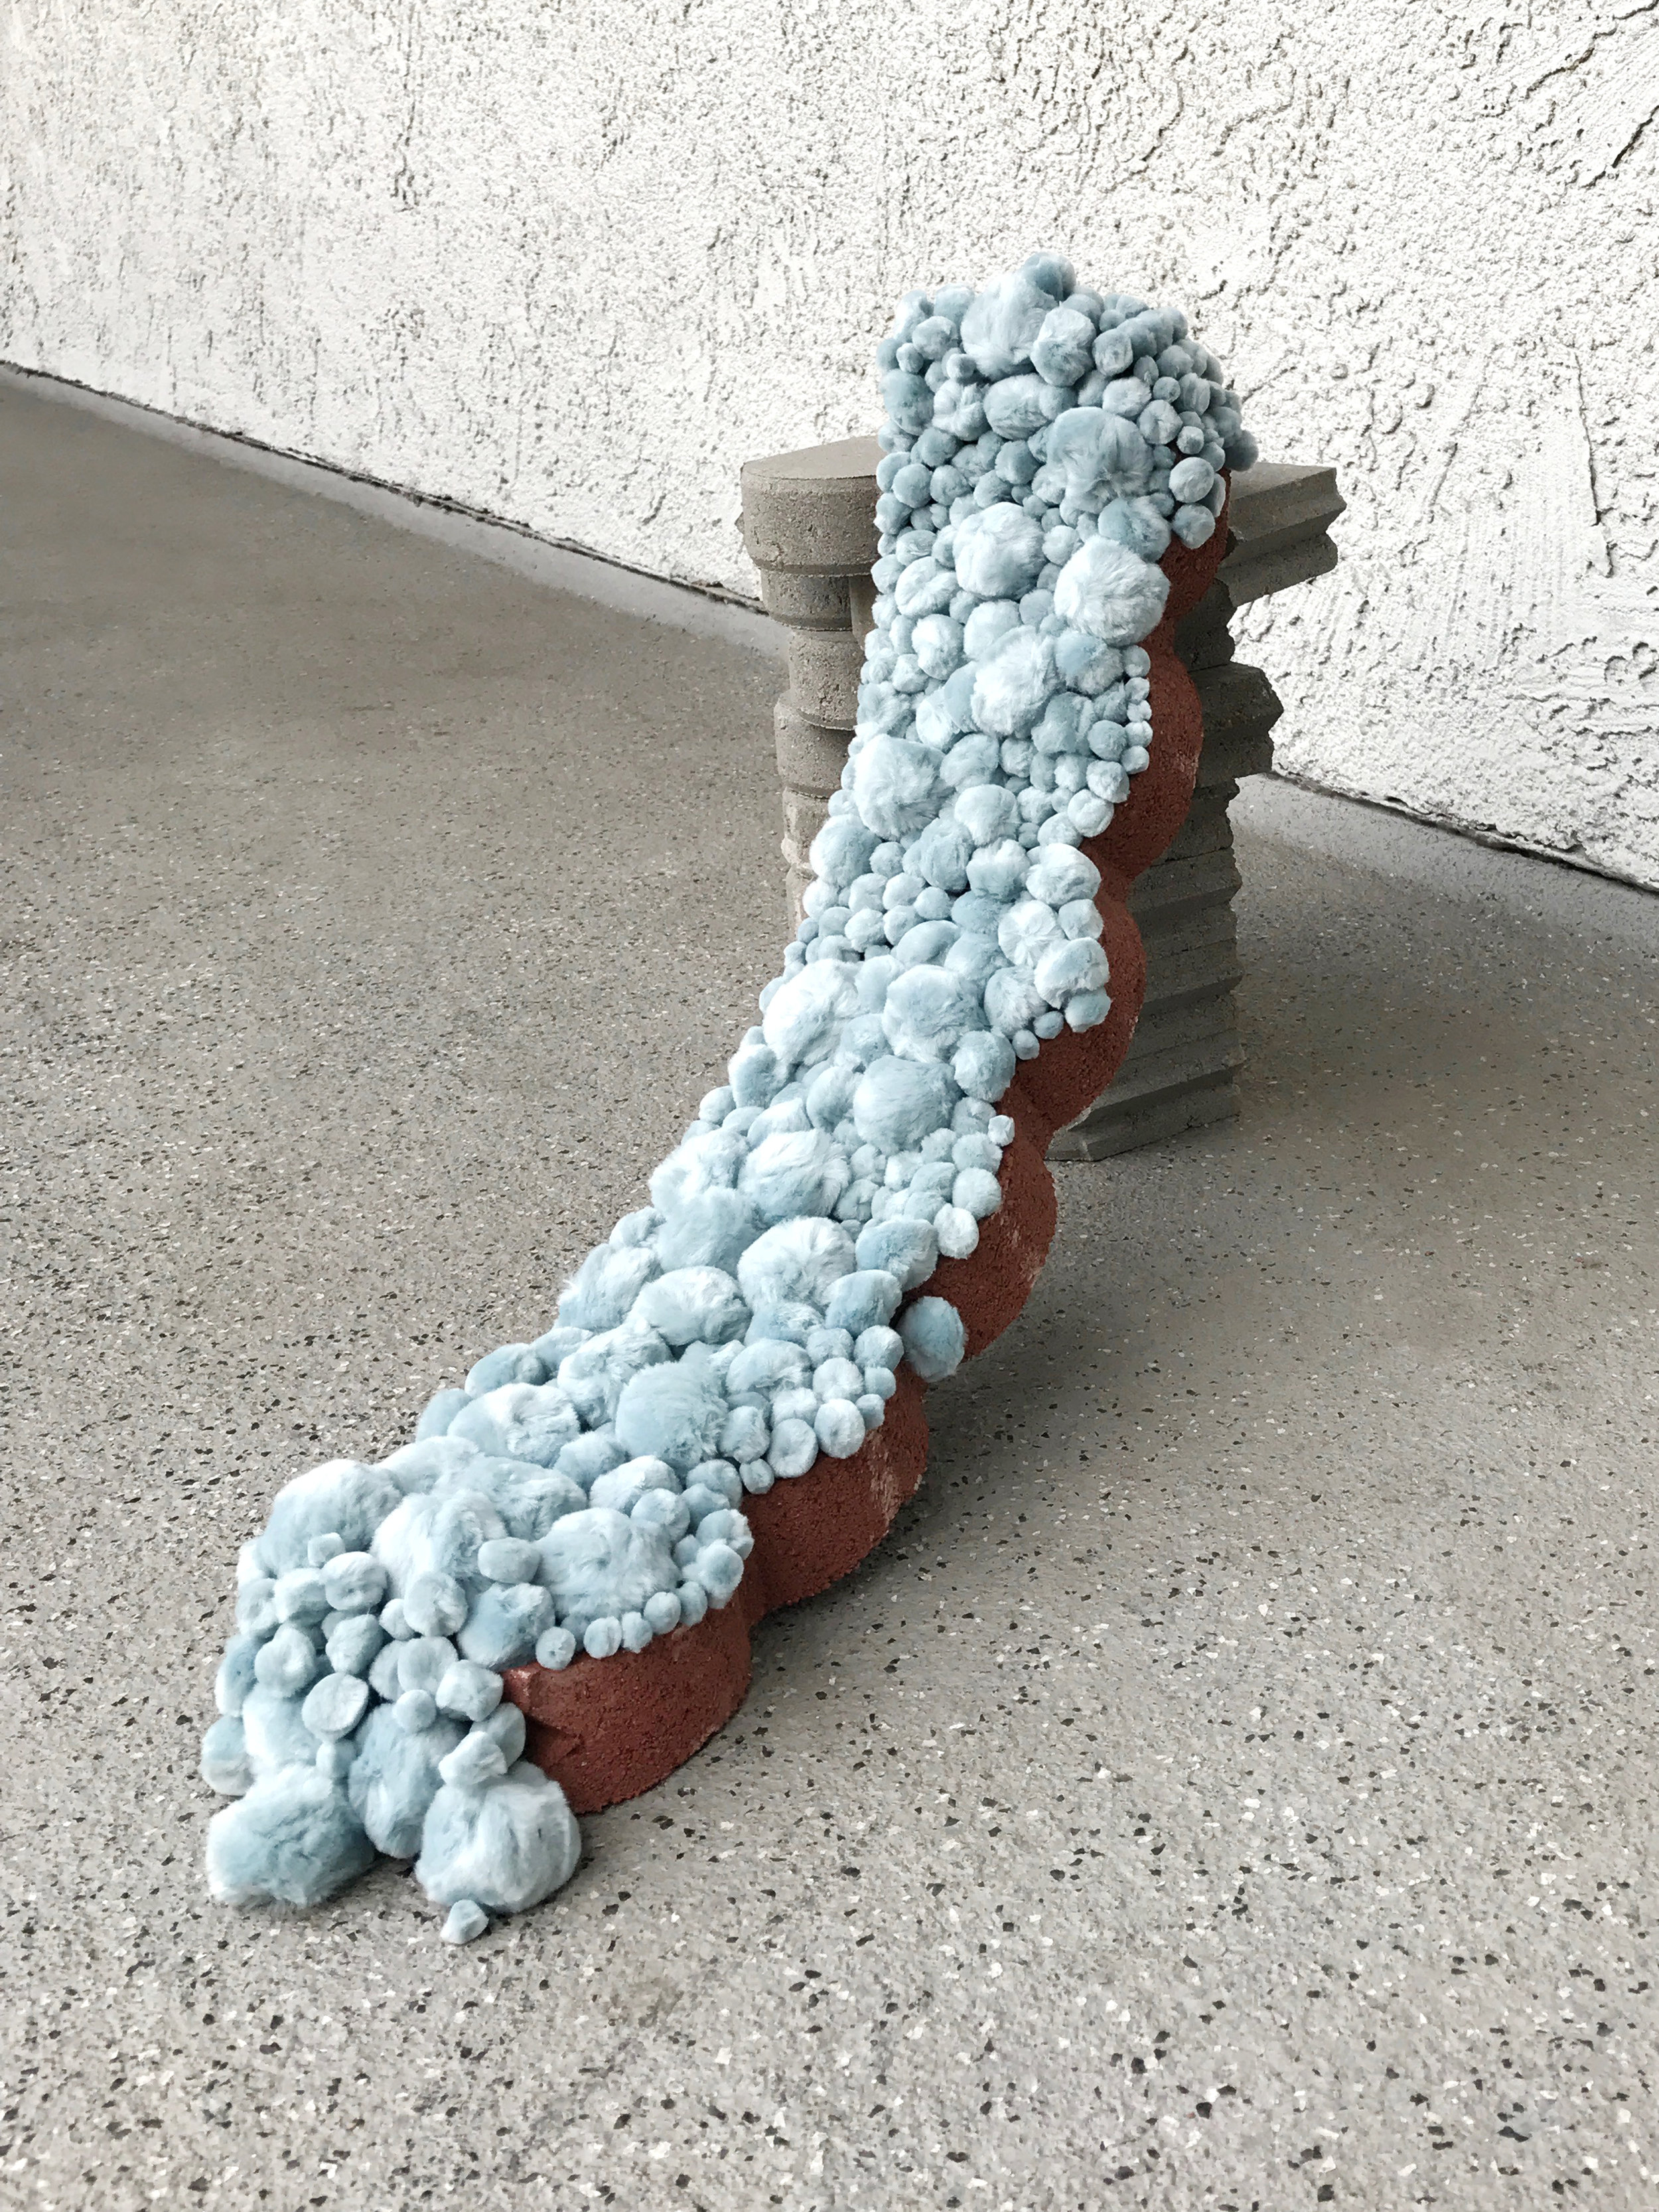    Frozen Crystals  , 2017  Brick and pompom 18x26x26 inches 